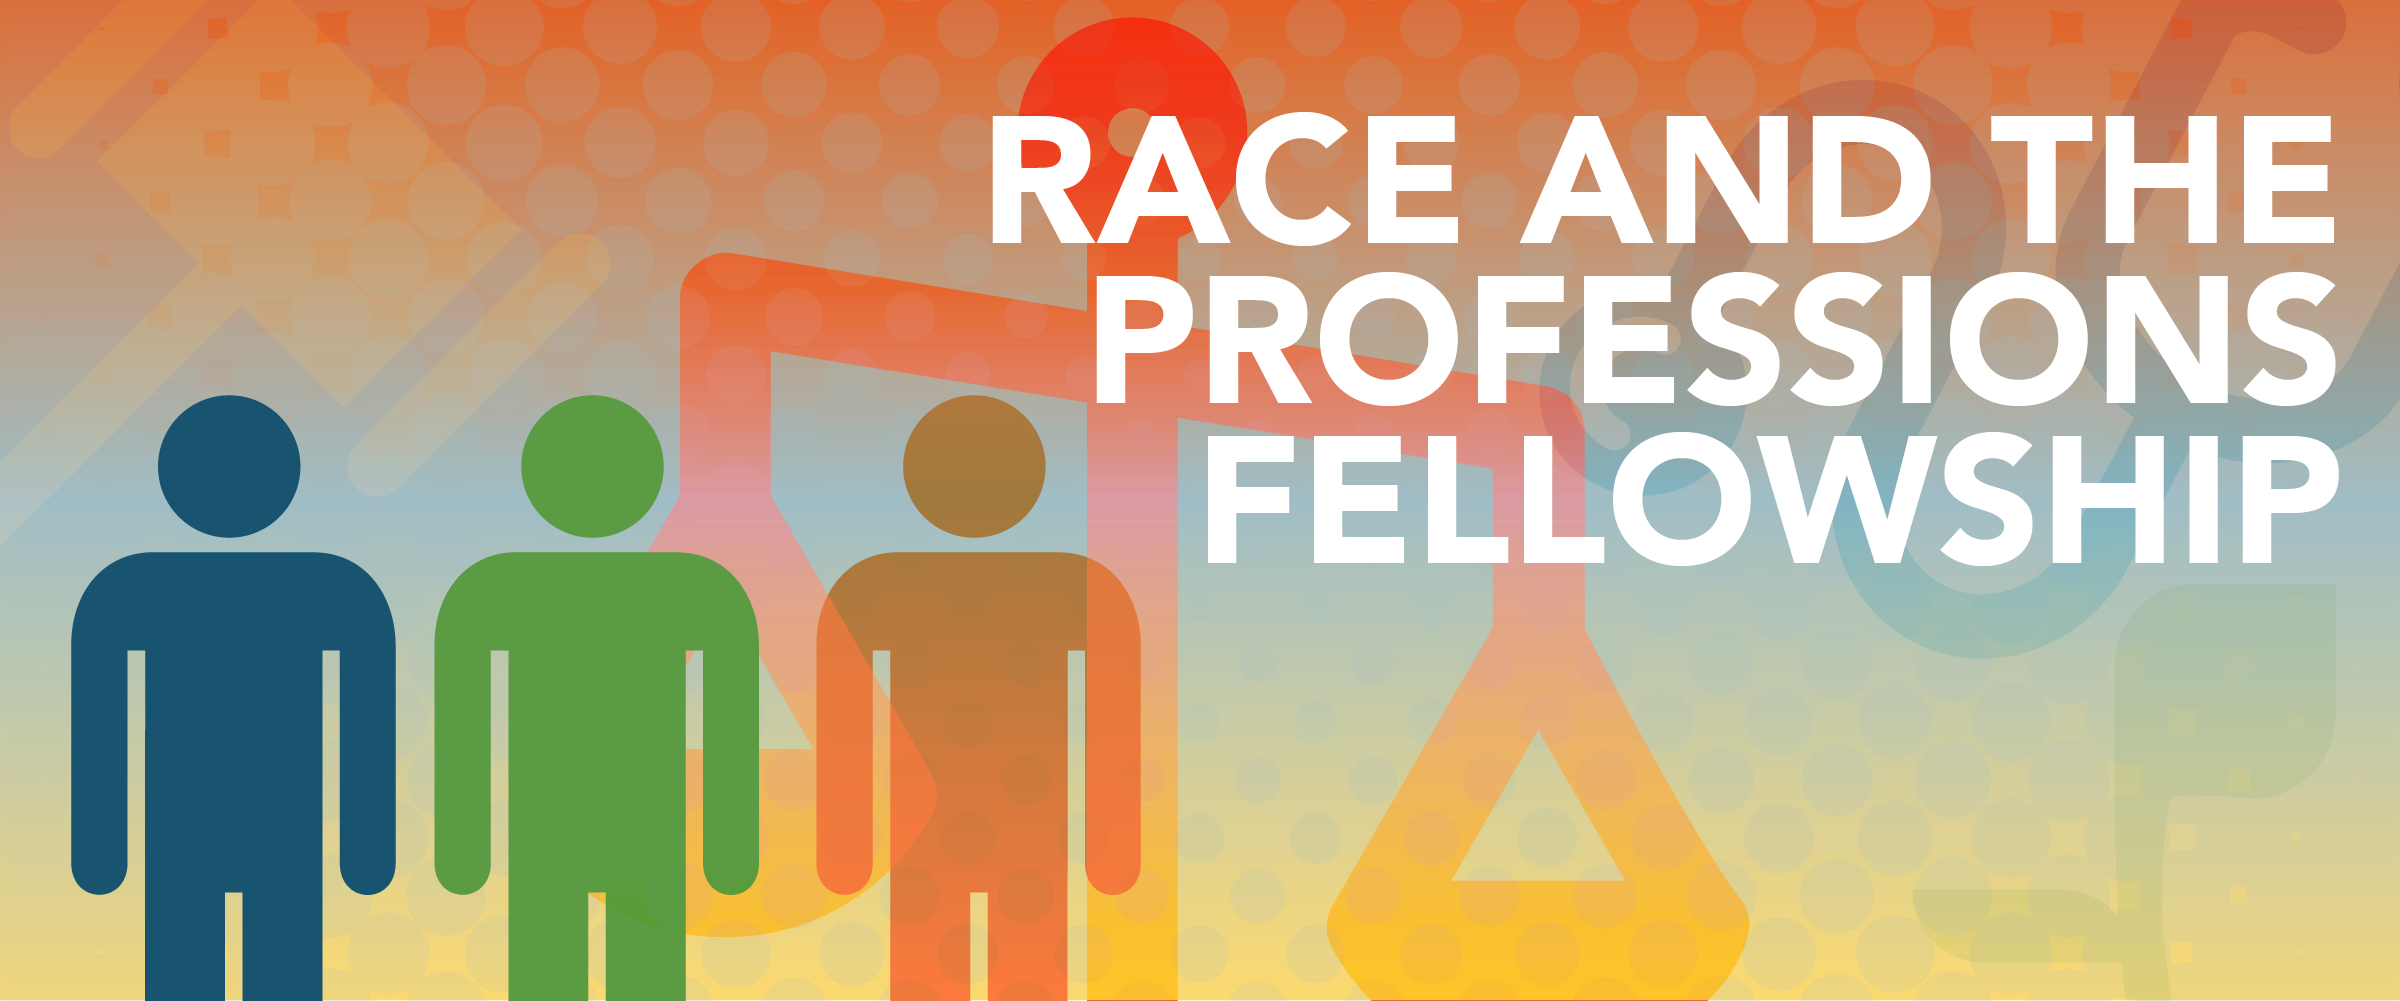 Decorative banner for the Race and the Professions Fellowship